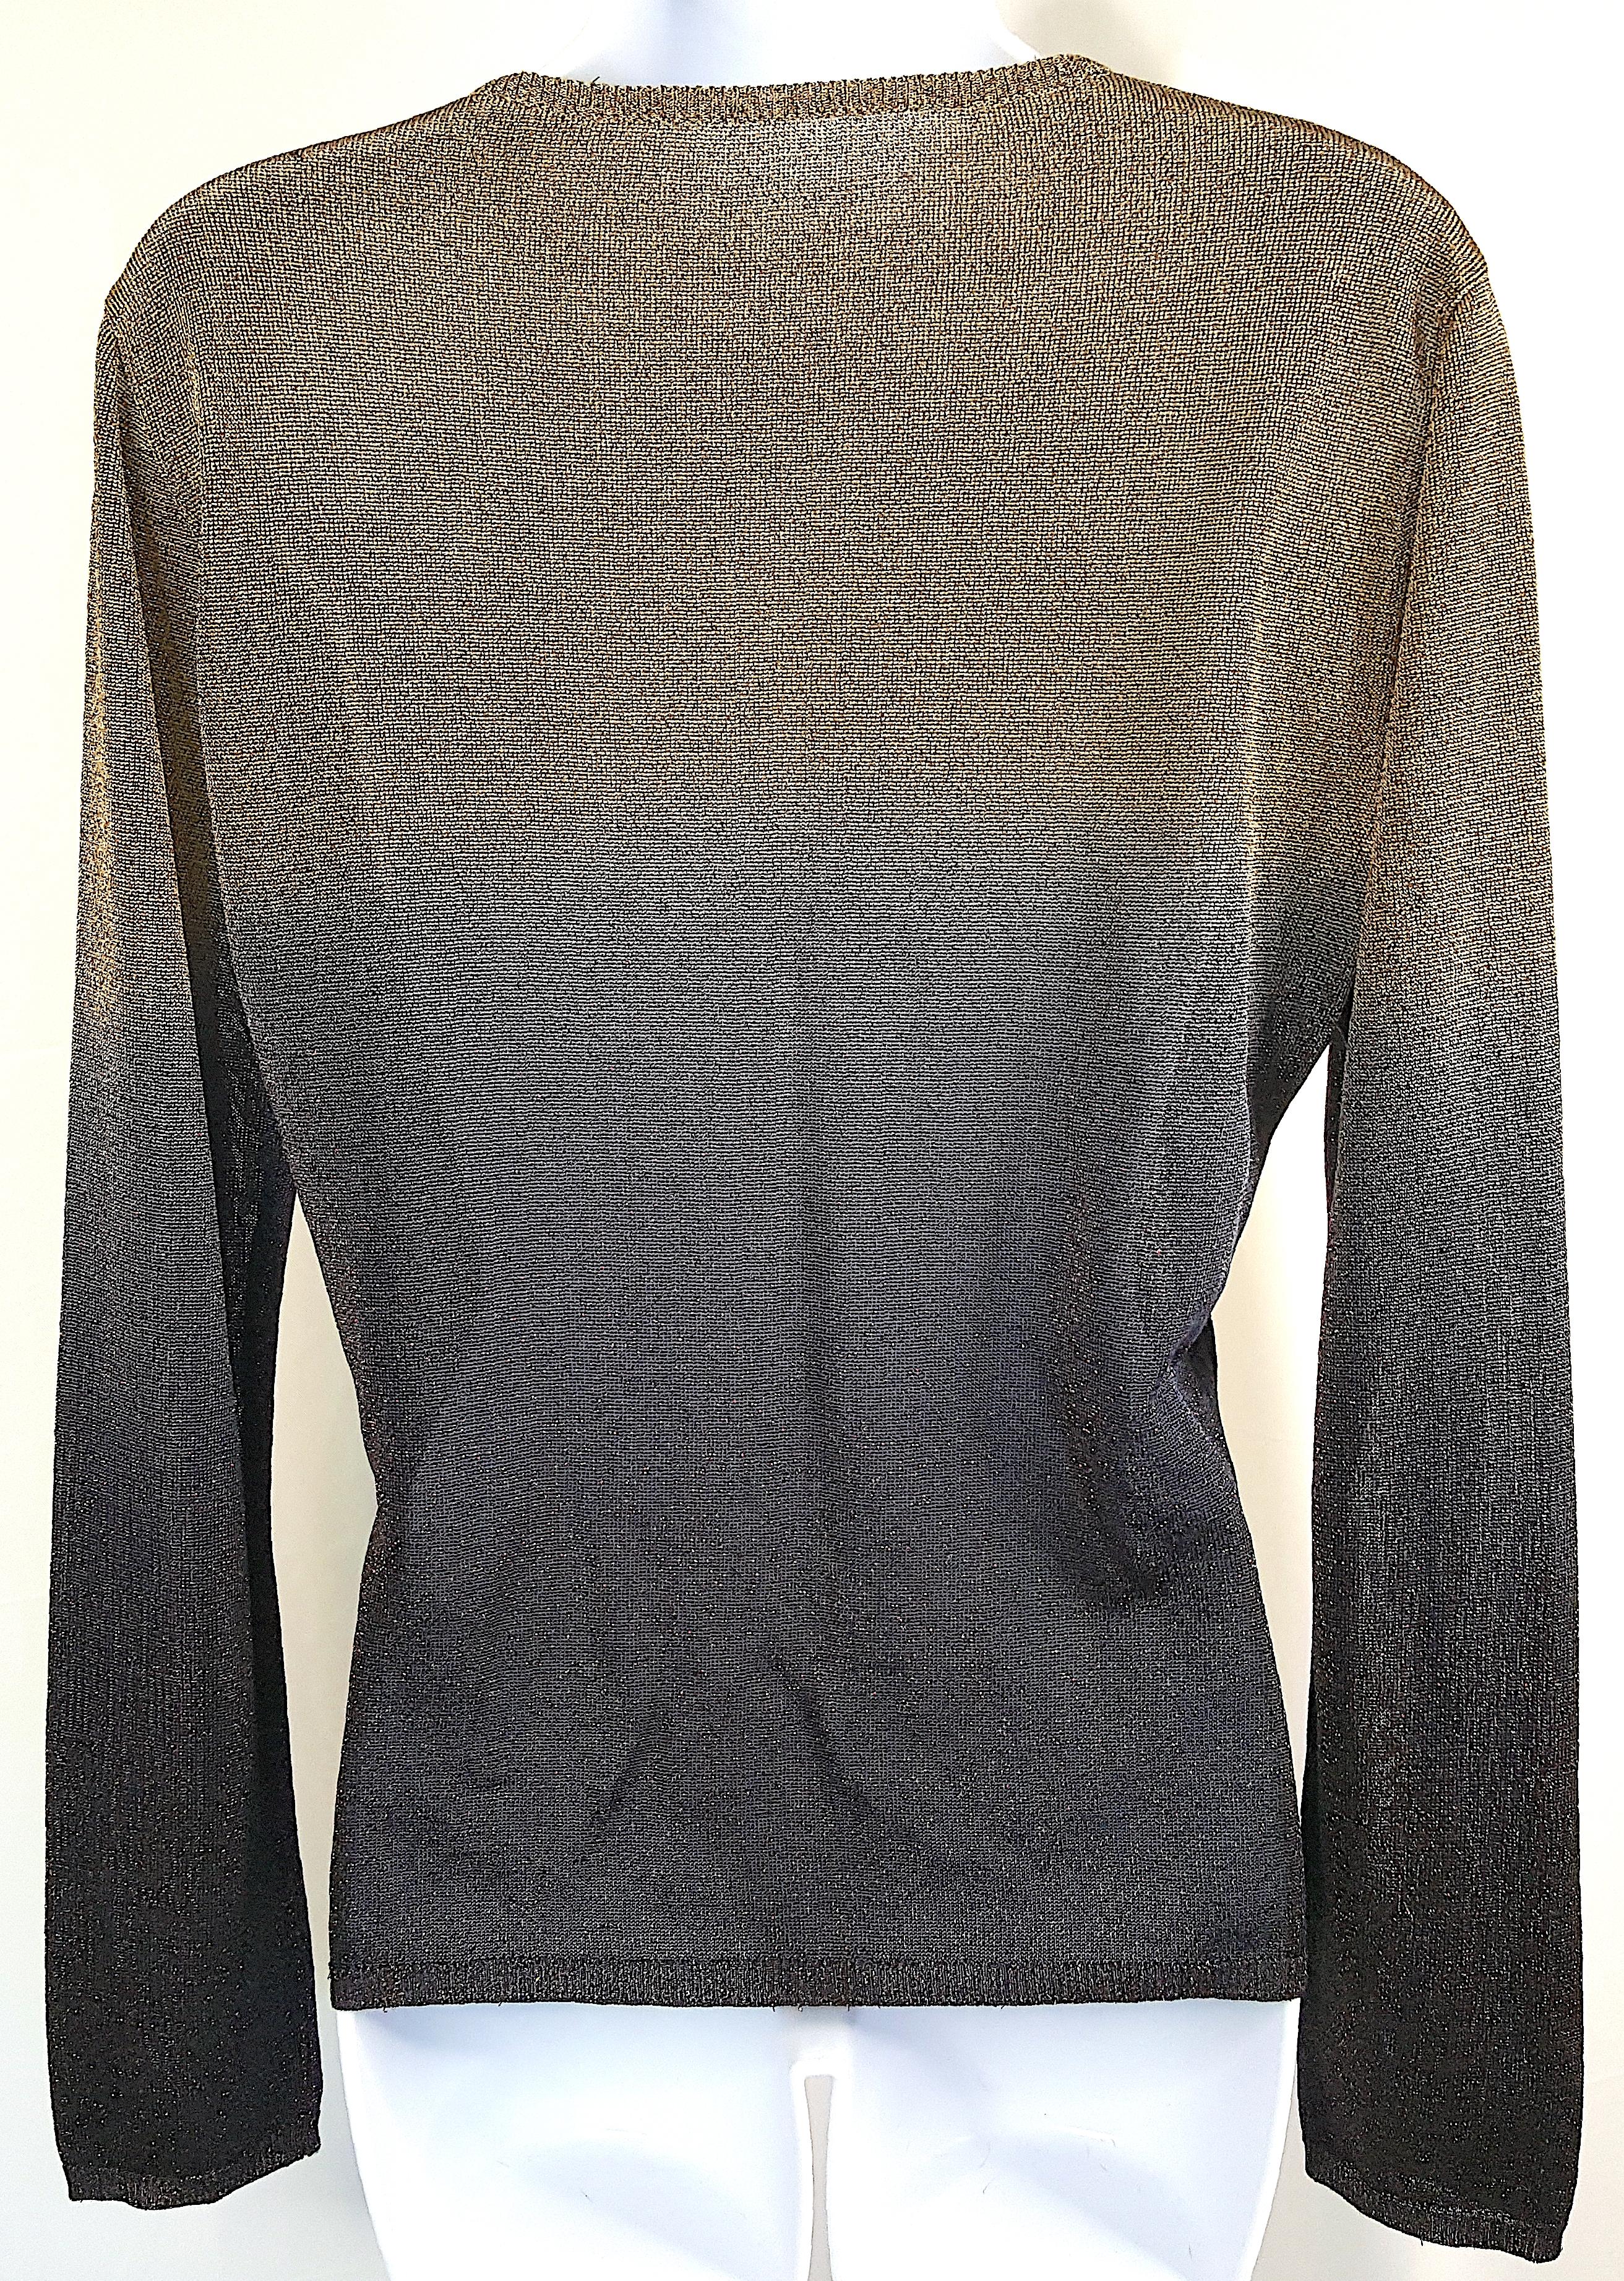 MartinMargiela 1990s MissDeannaKnit GoldLurexThreaded FauxDipDyed Ombre Pullover For Sale 5